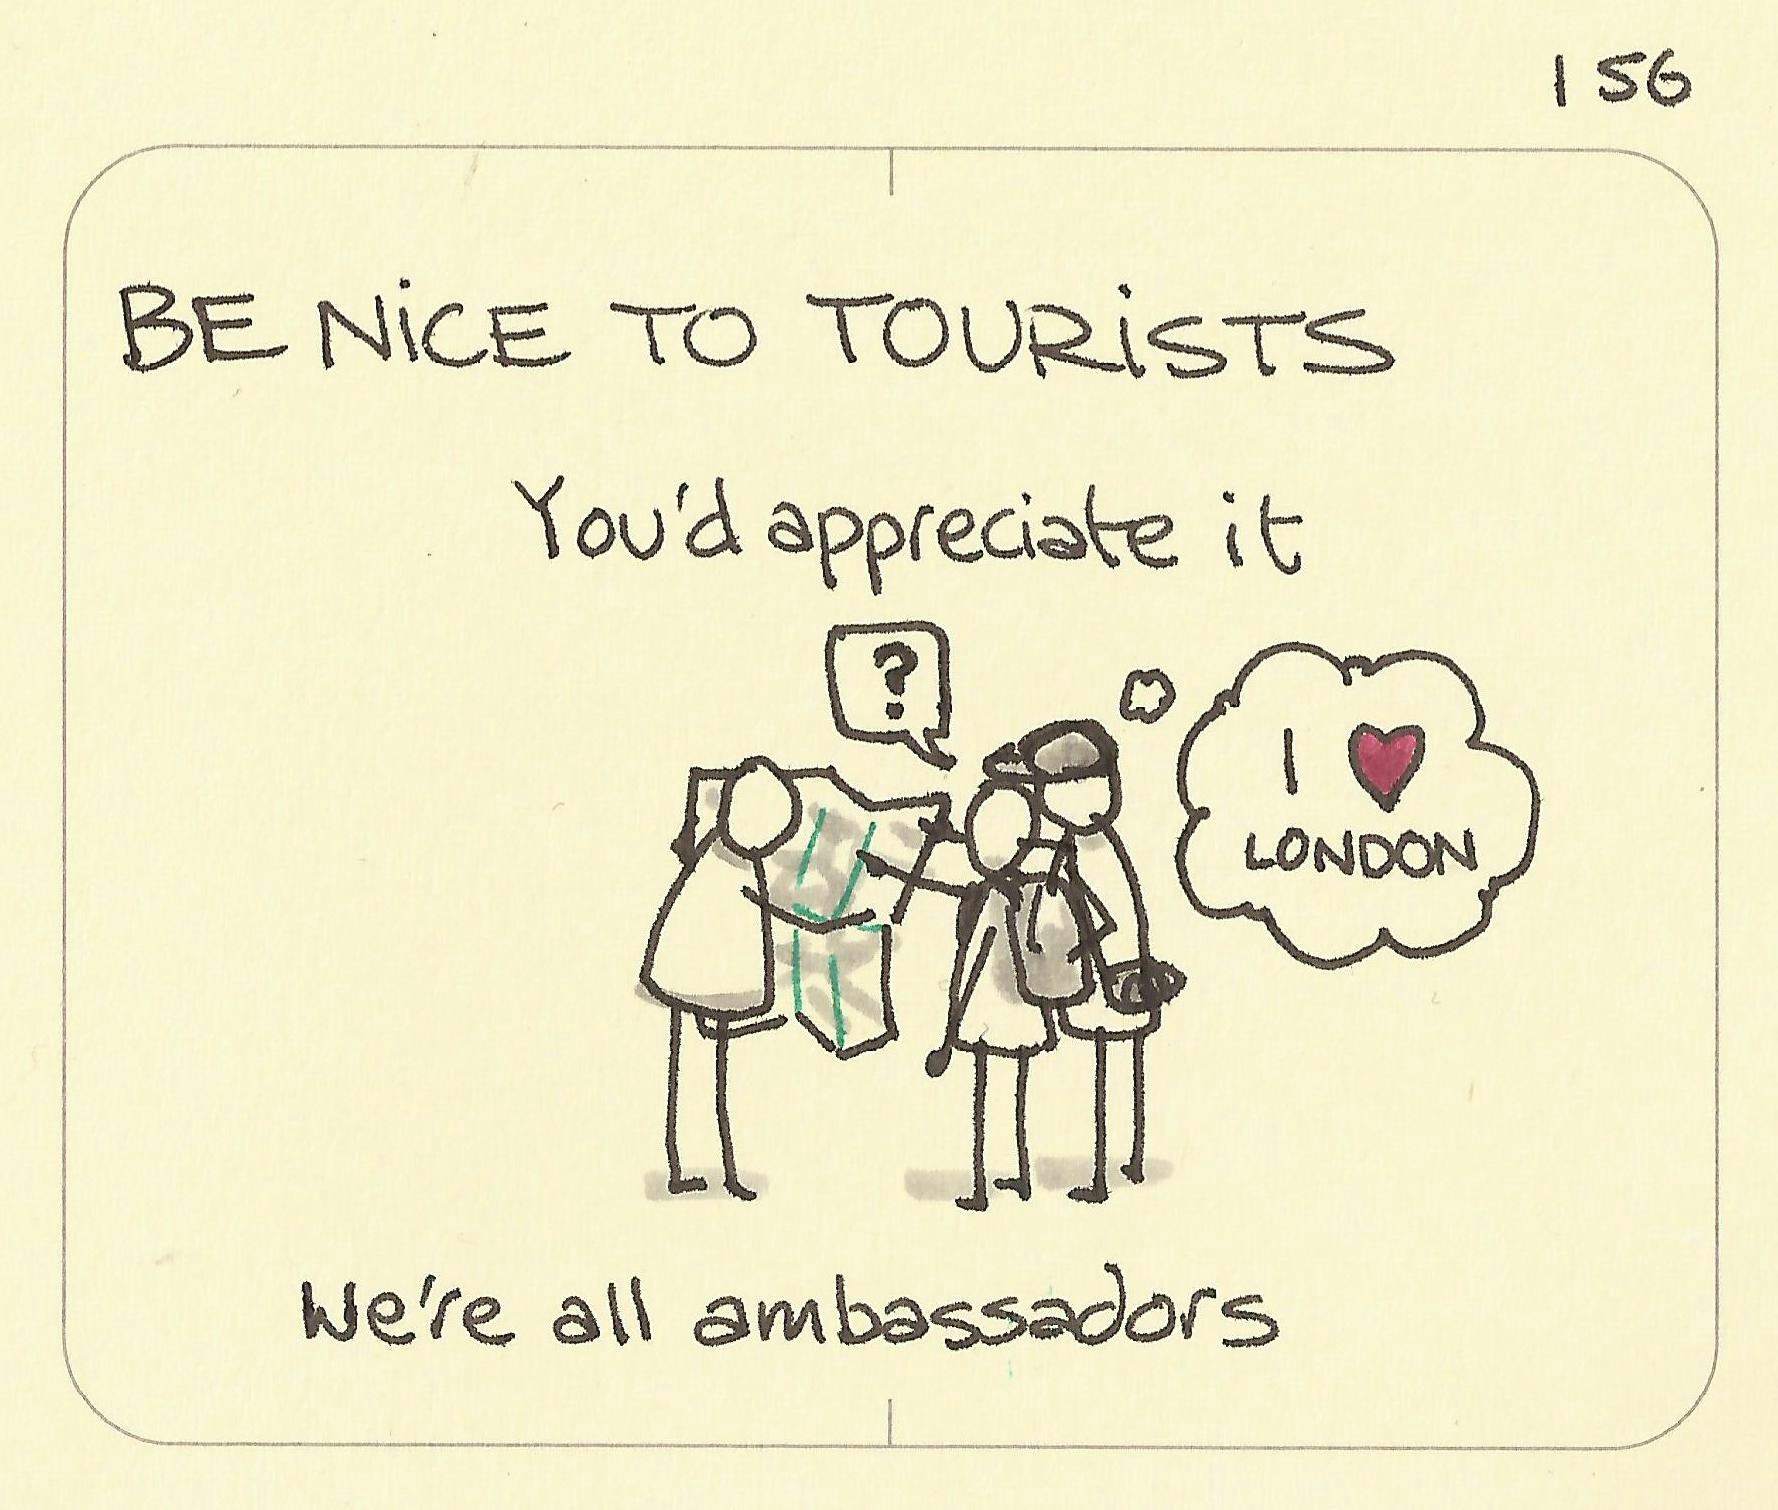 Be nice to tourists - Sketchplanations